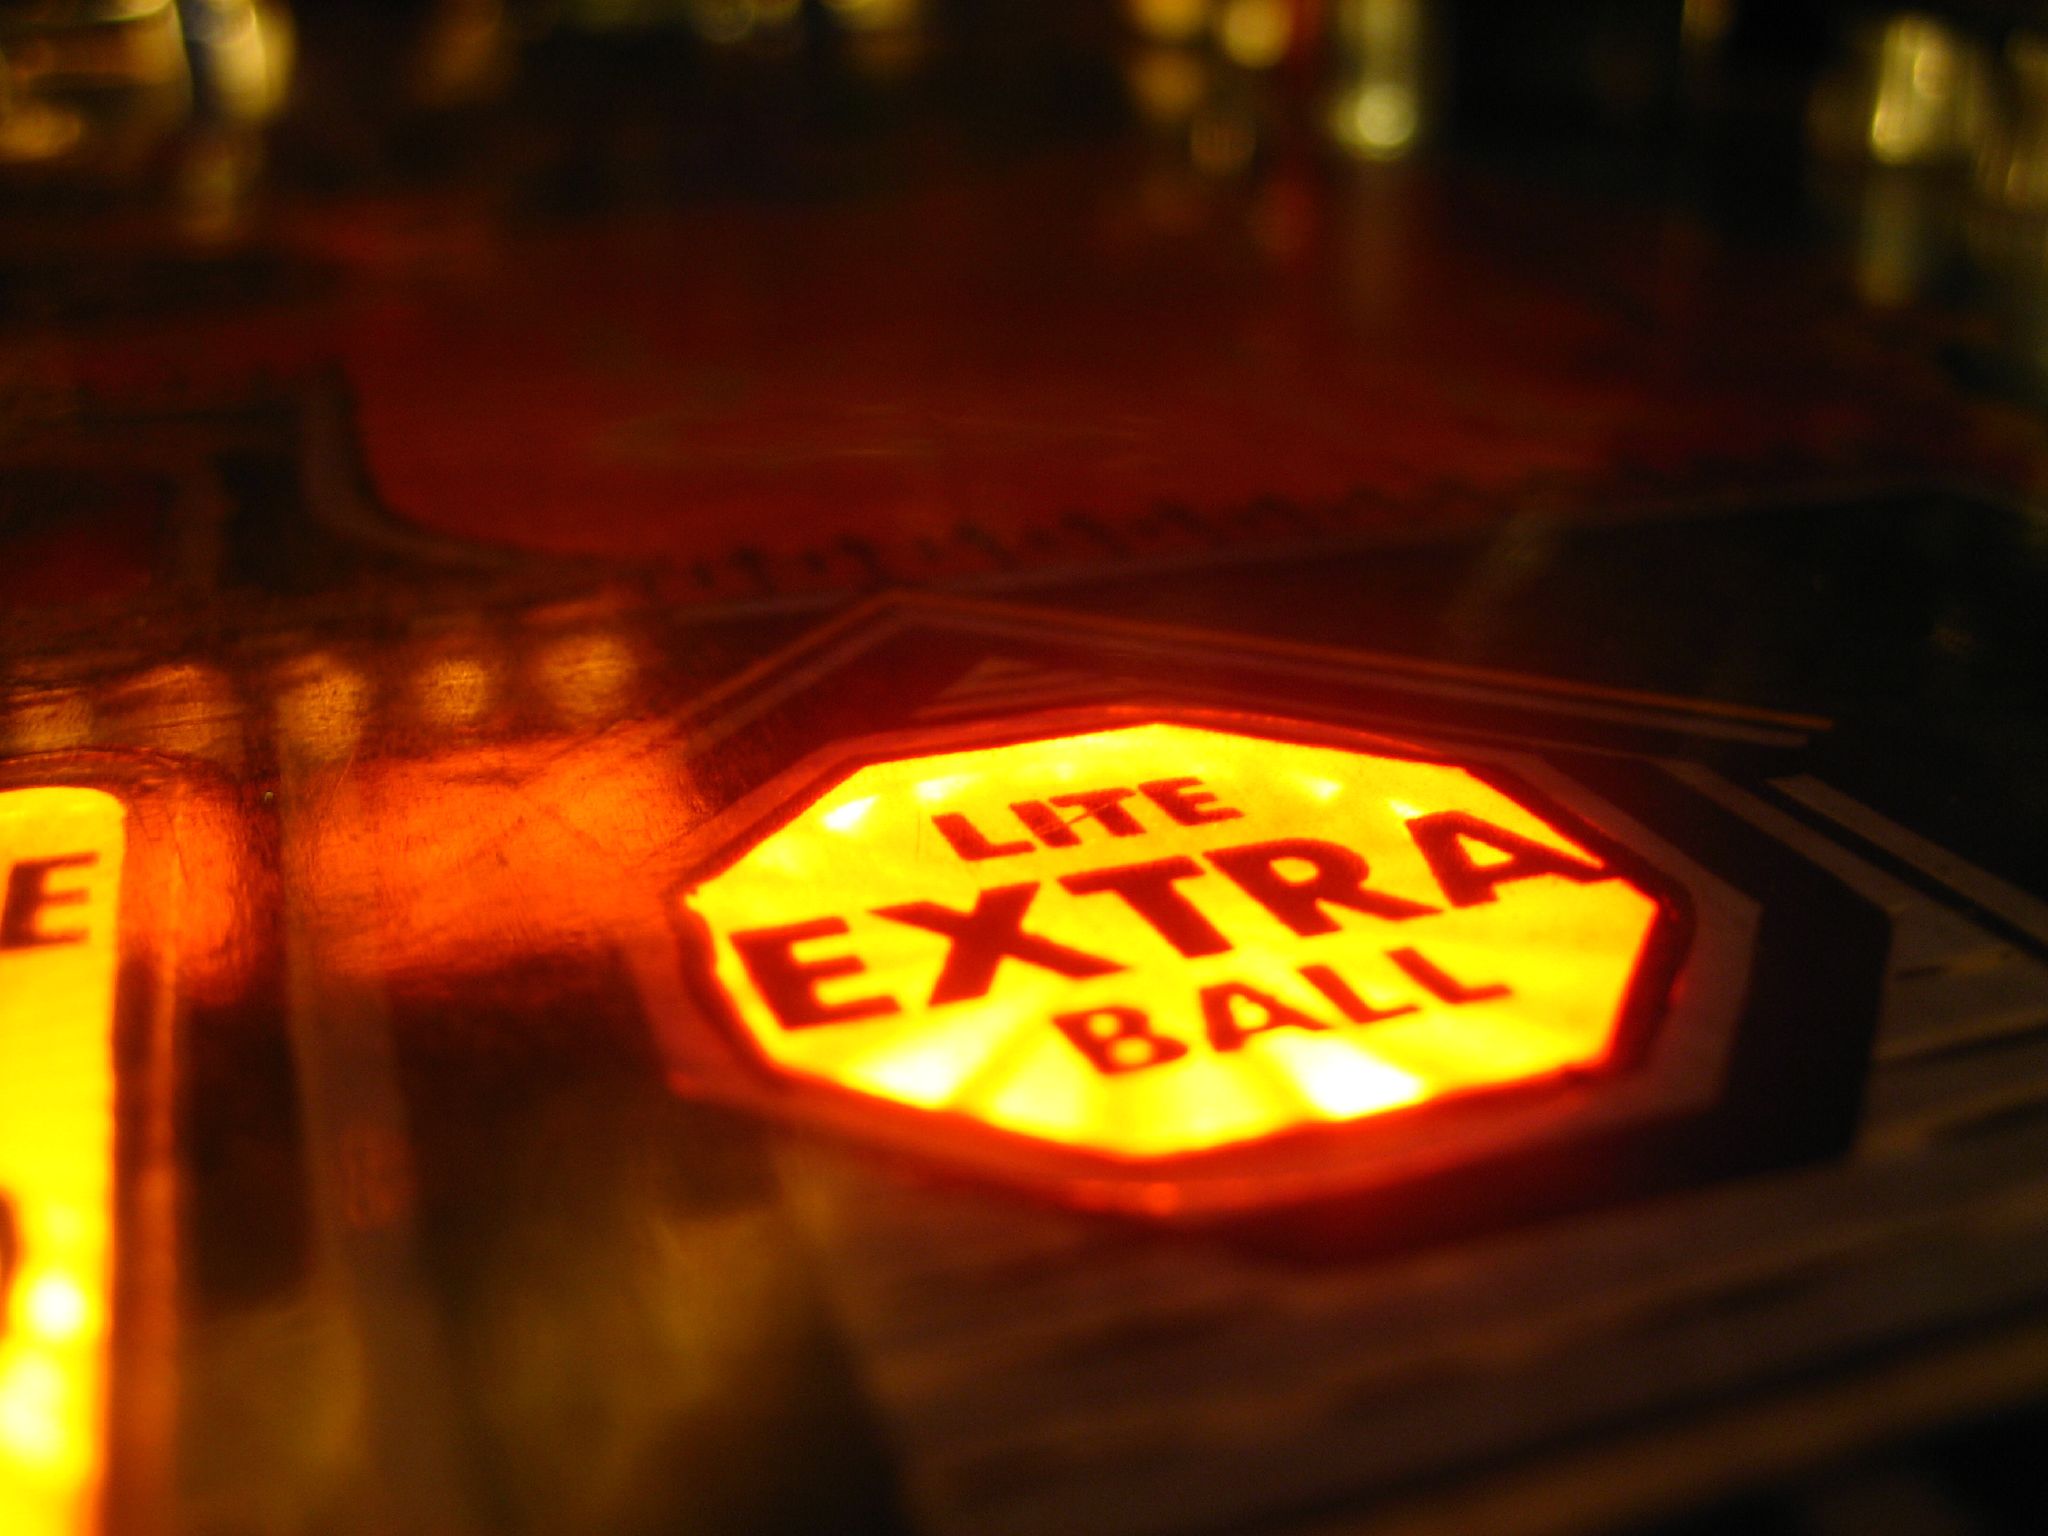 Lite extra ball, from https://www.flickr.com/photos/st3f4n/143623902